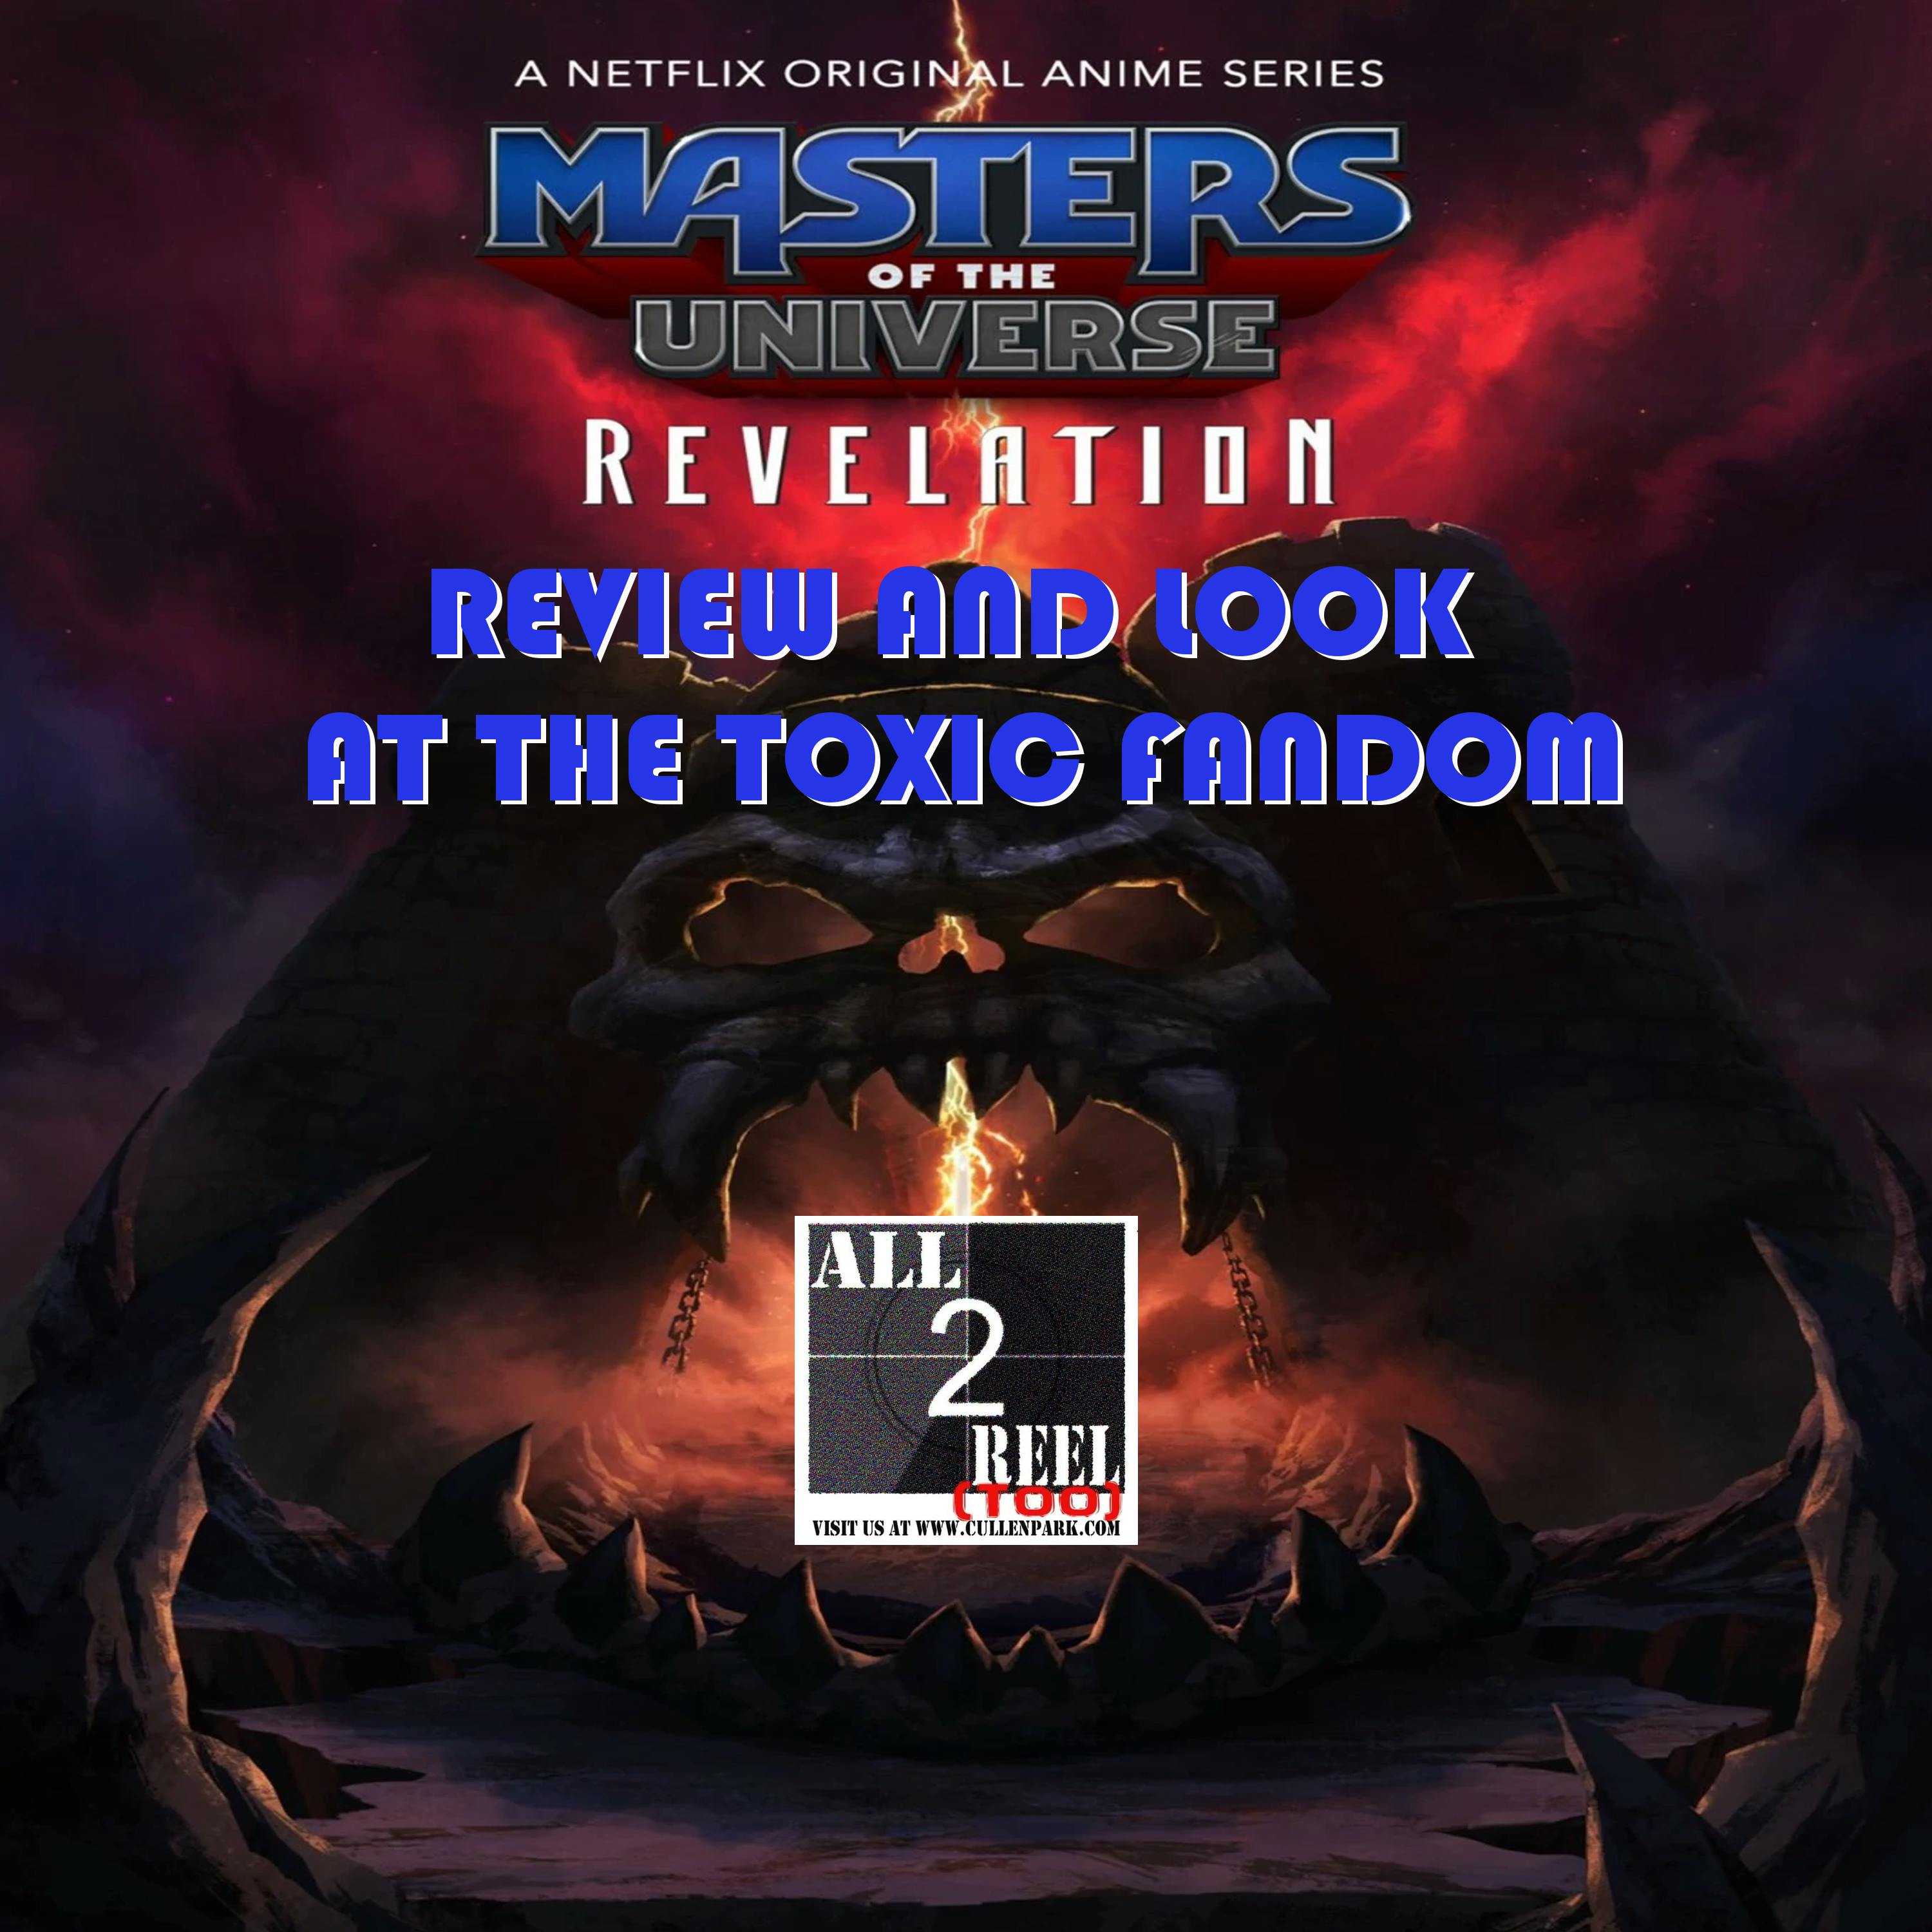 MASTERS OF THE UNIVERSE: REVELATION - REVIEW AND LOOK AT THE TOXIC FANDOM Image